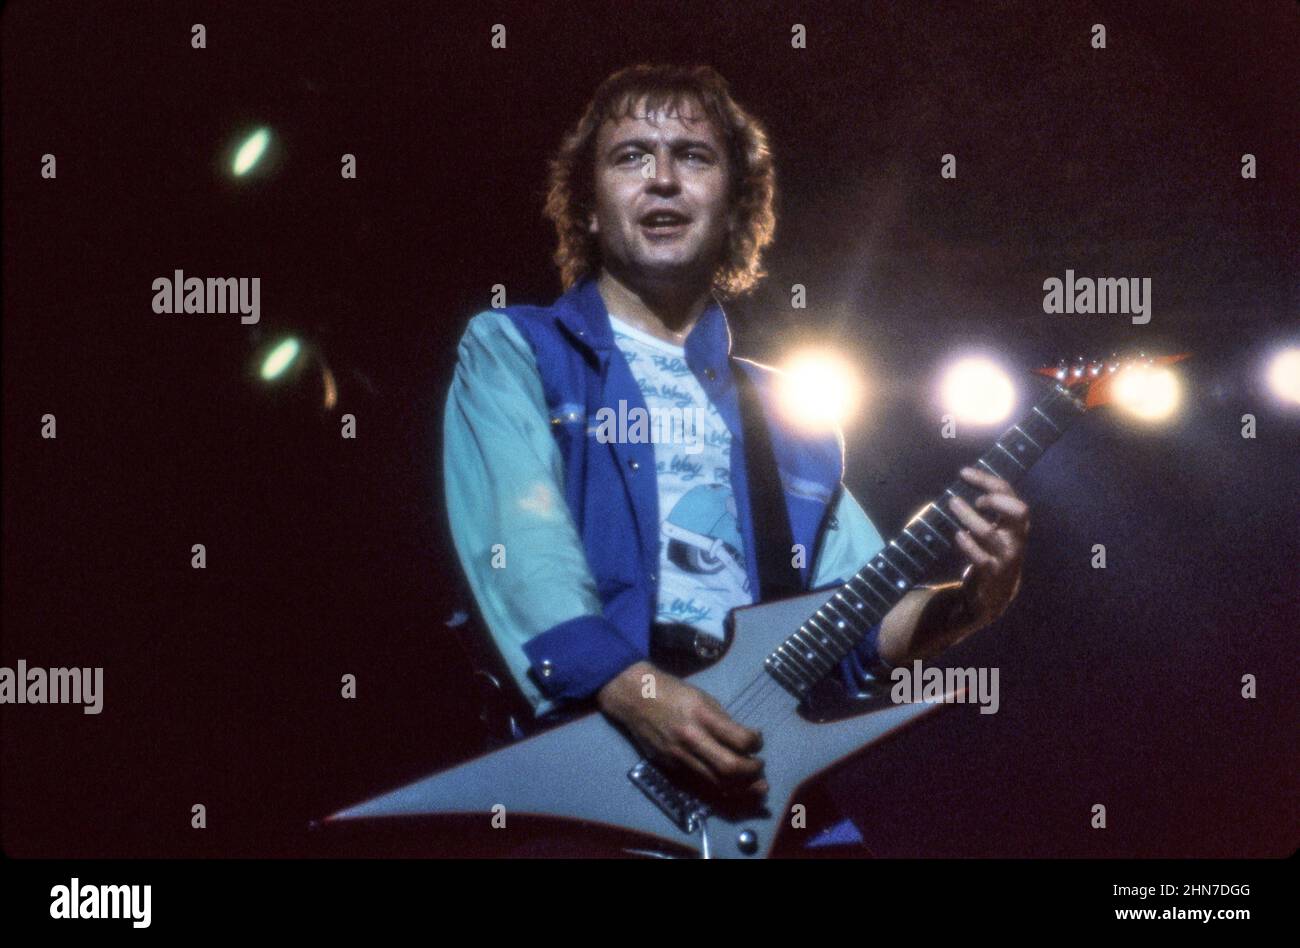 Guitarist Mick Jones of Anglo-American band Foreigner performing at Wembley Arena, London in 1985. Stock Photo